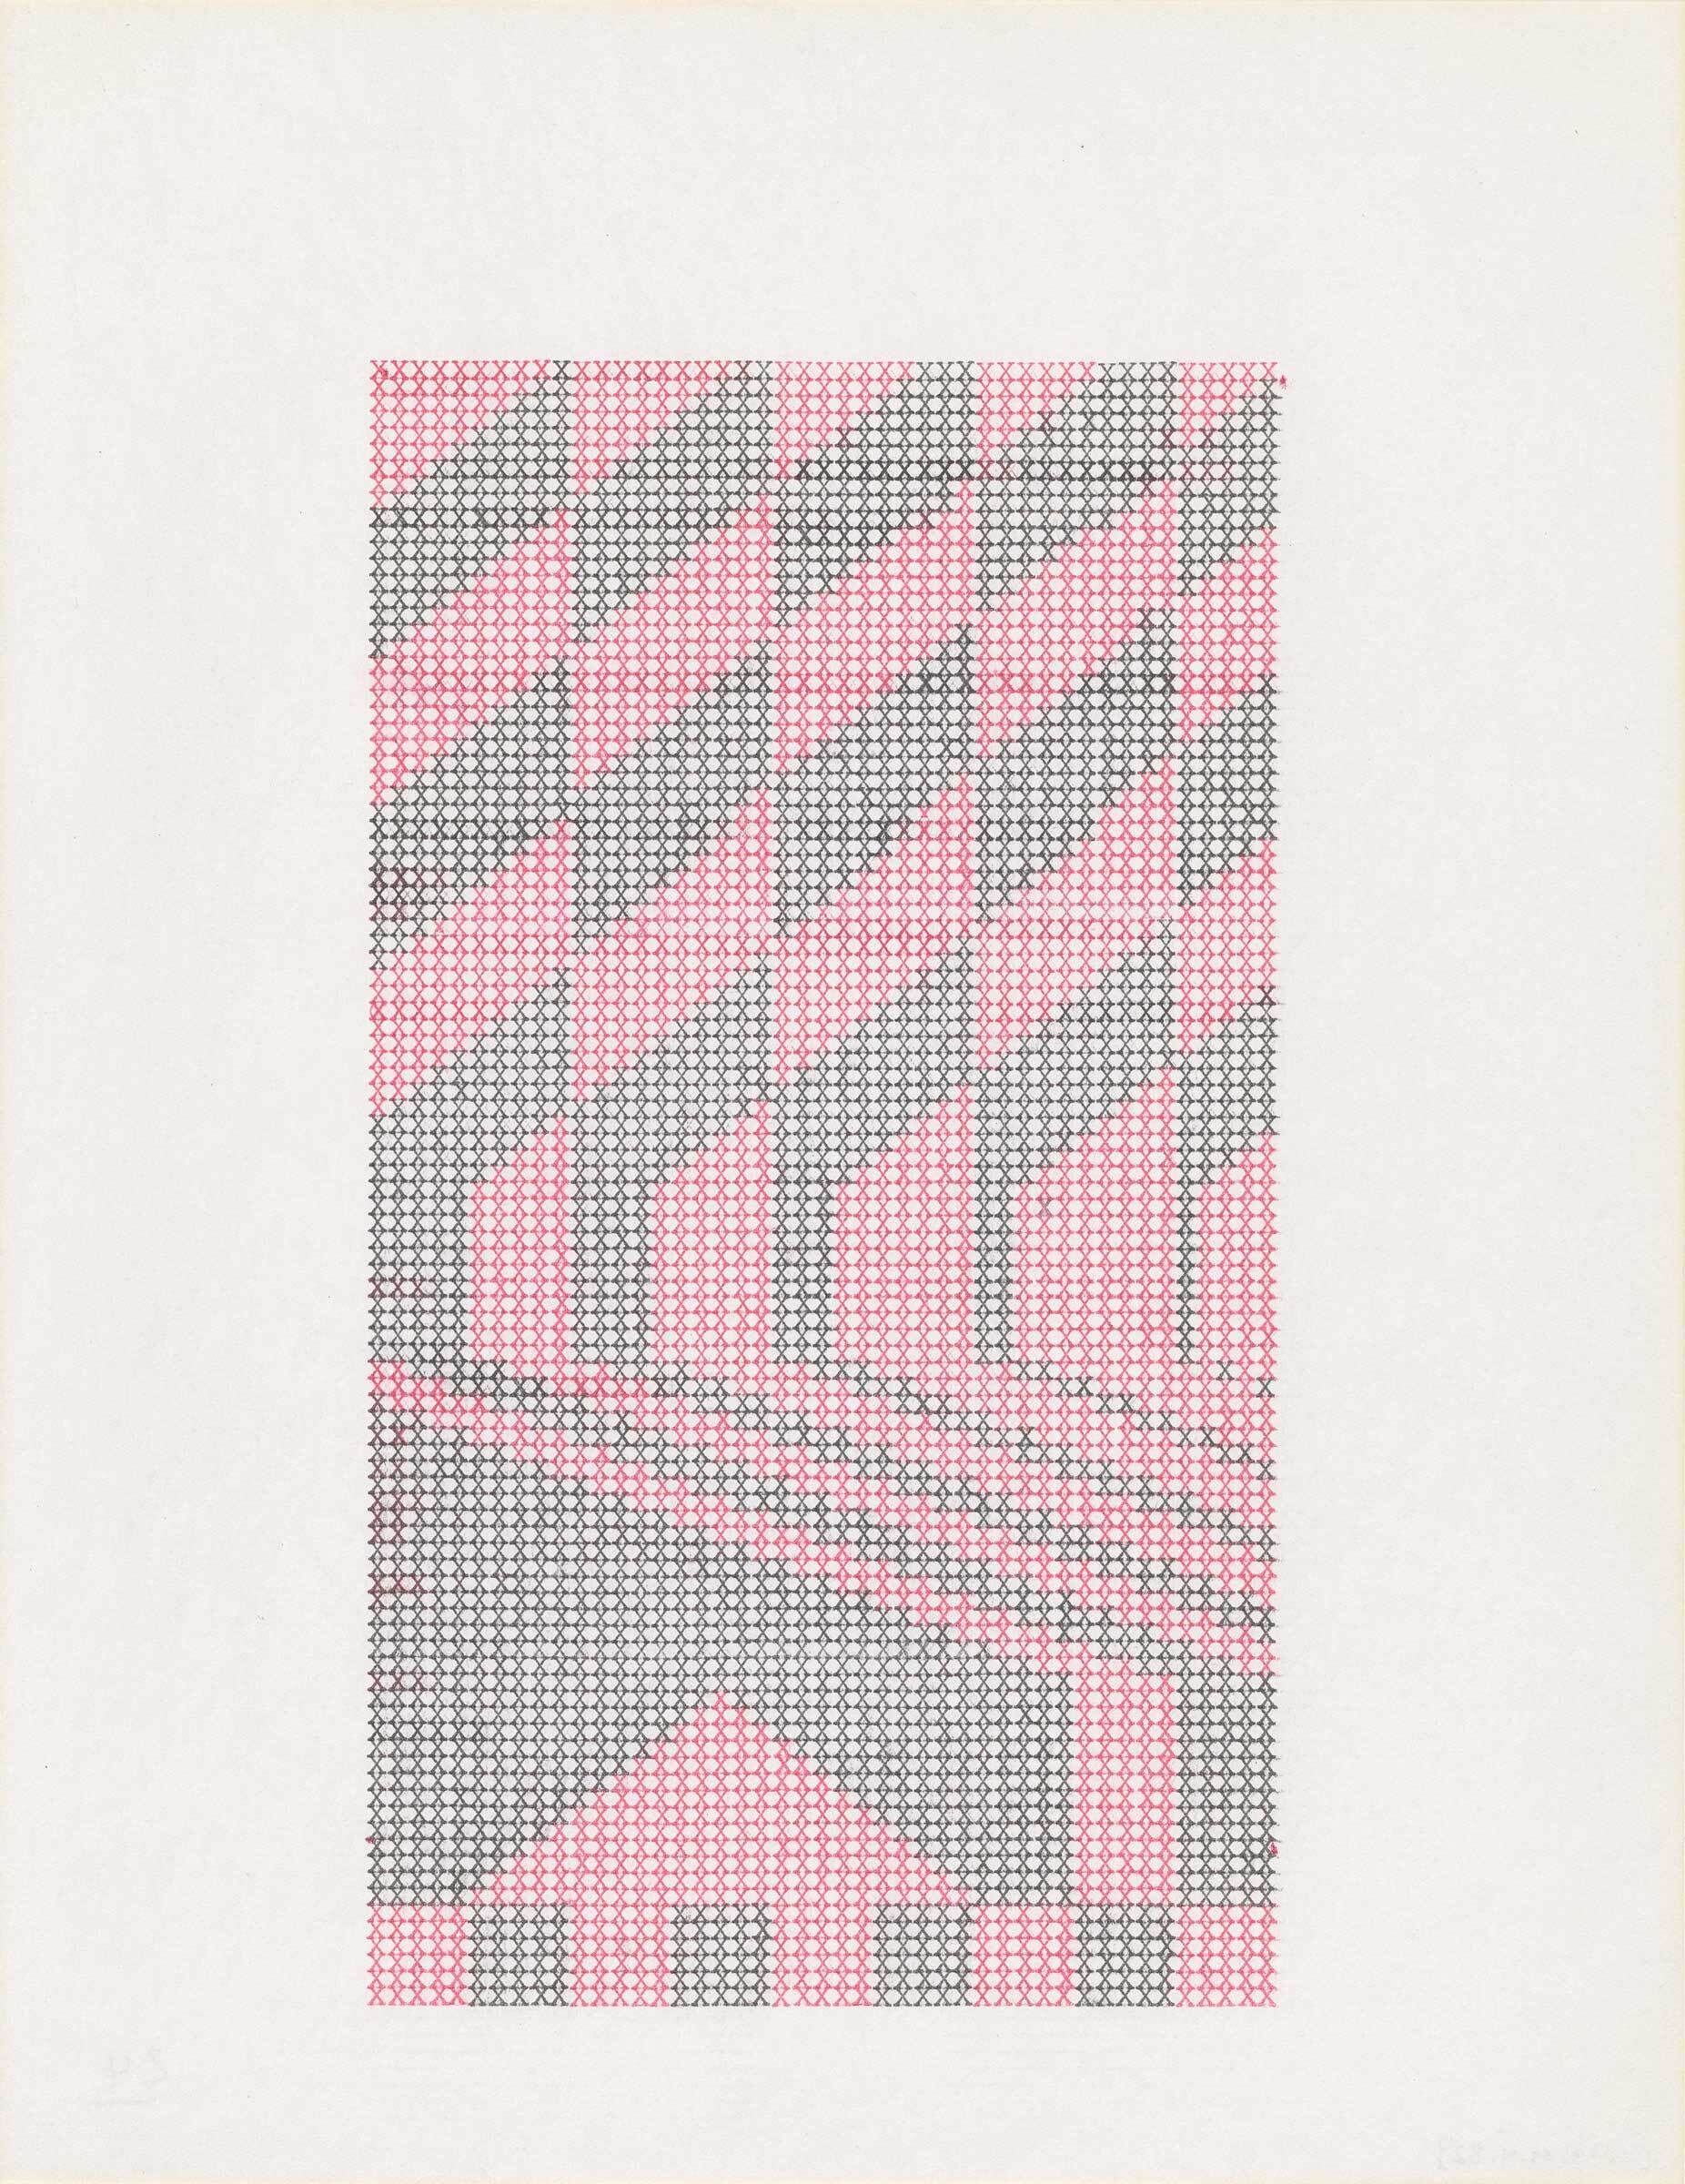 An image of geometric shapes in shades of grey and pink, with a border of white around it.